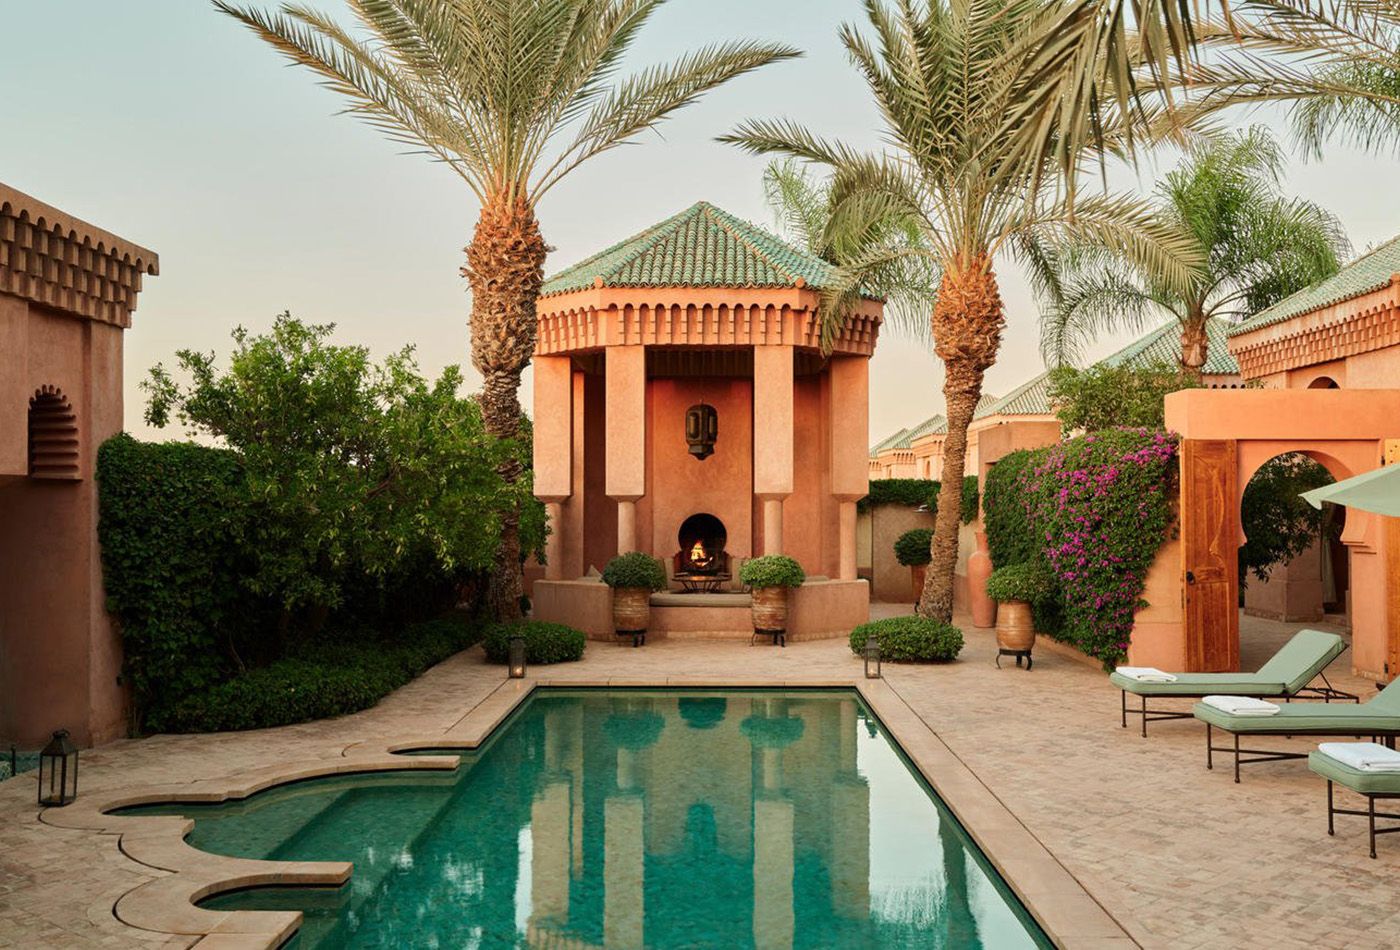 Terracotta maison and palm trees surround a secluded private swimming pool